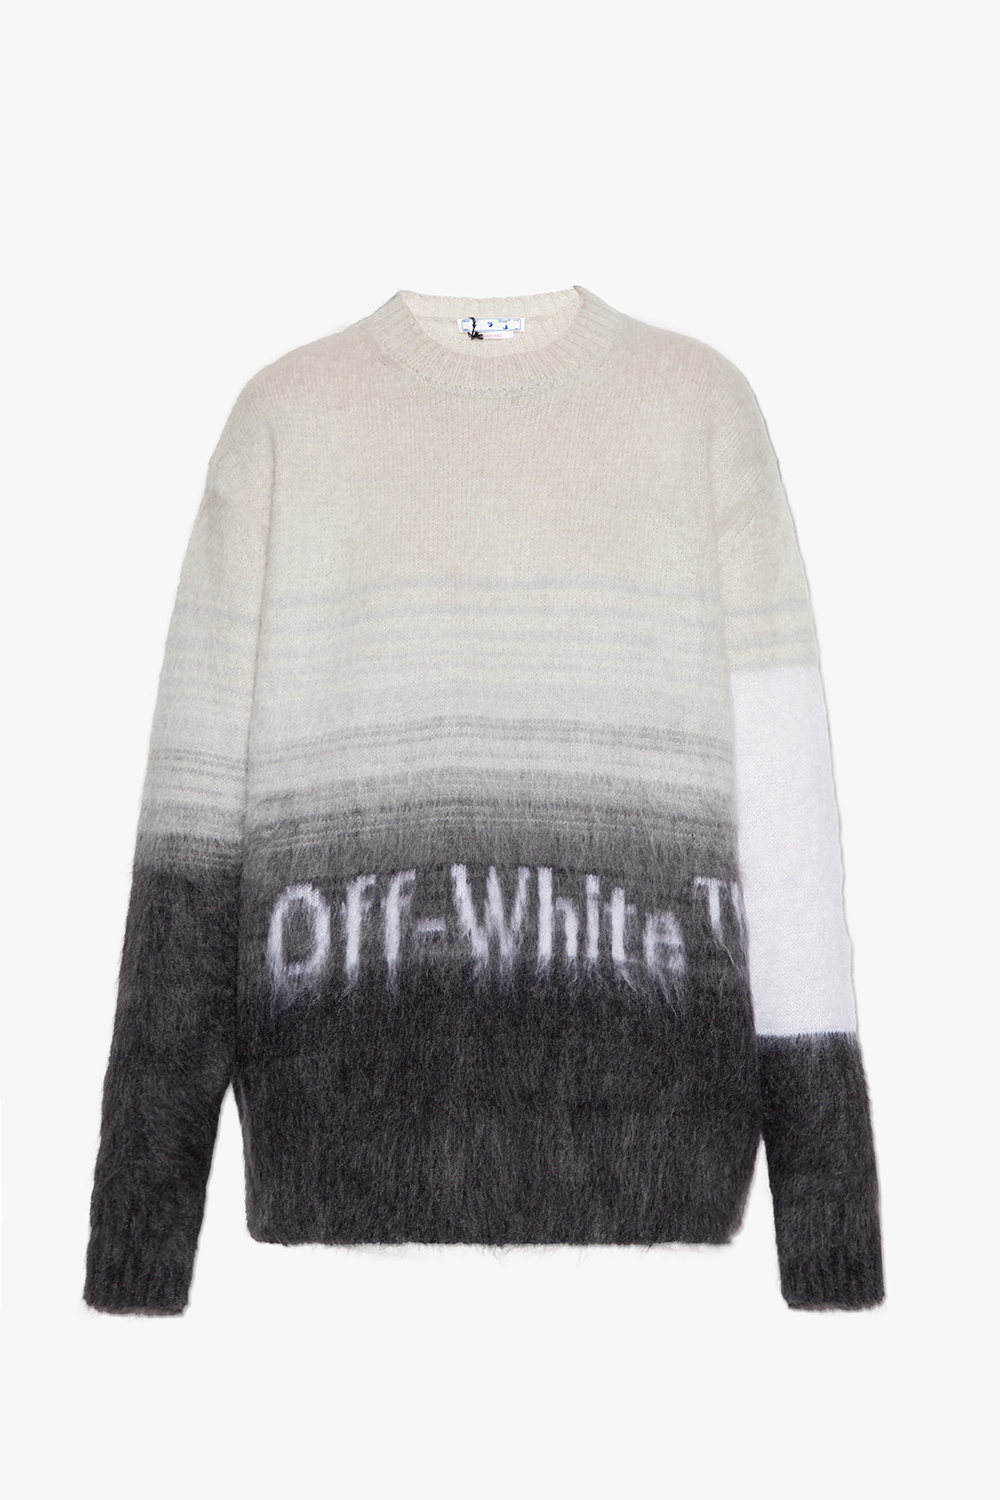 Off-White garment sweater with logo